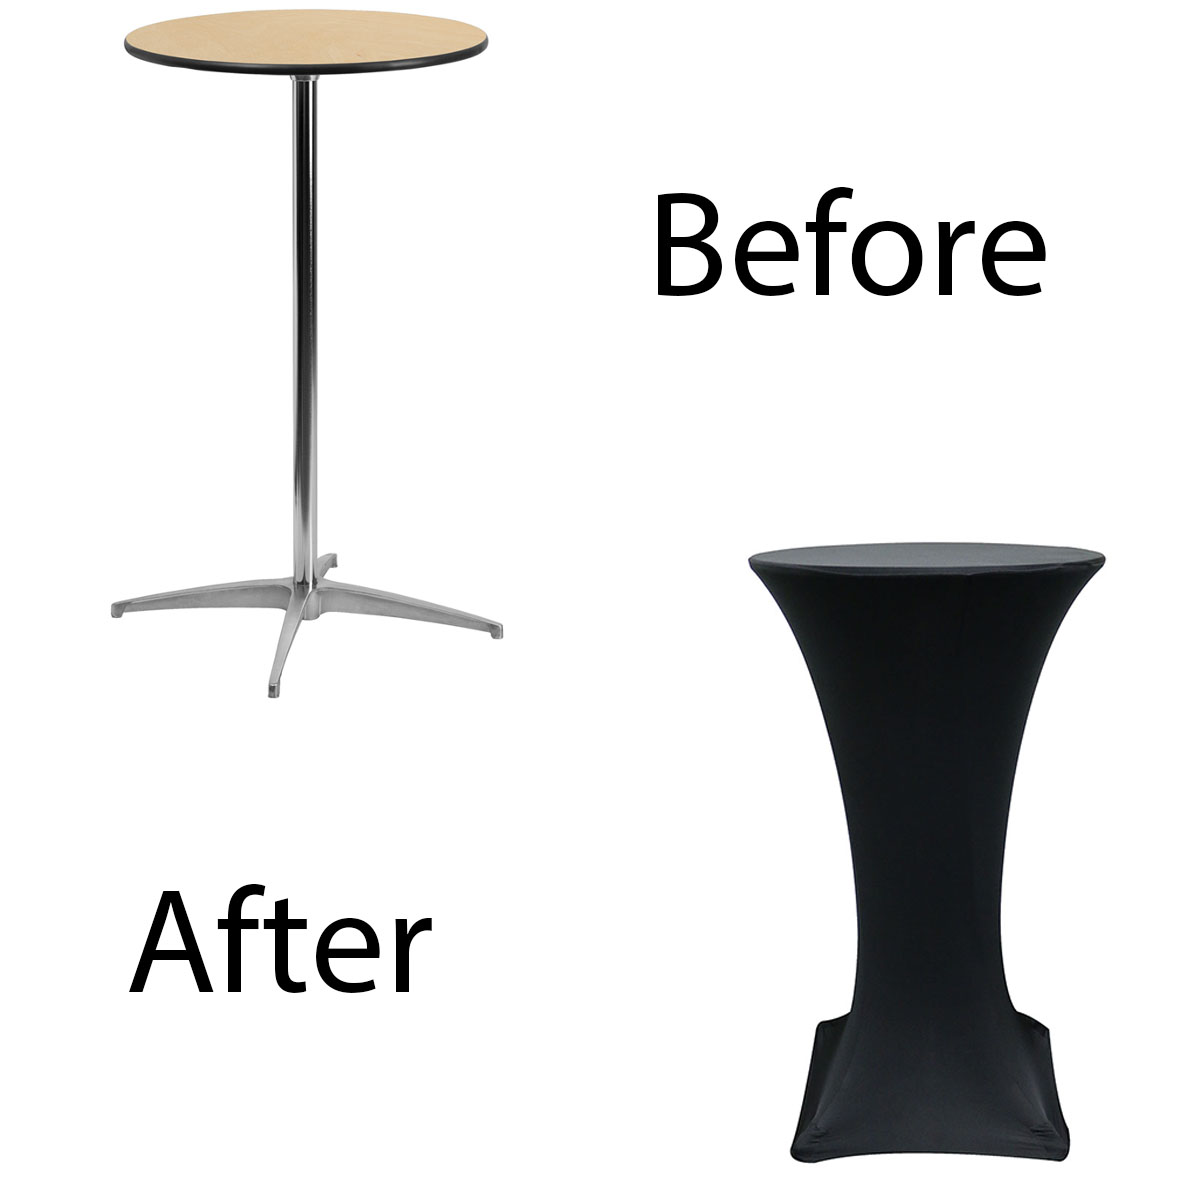 24-inch-highboy-cocktail-spandex-table-covers-black-before-after.jpg